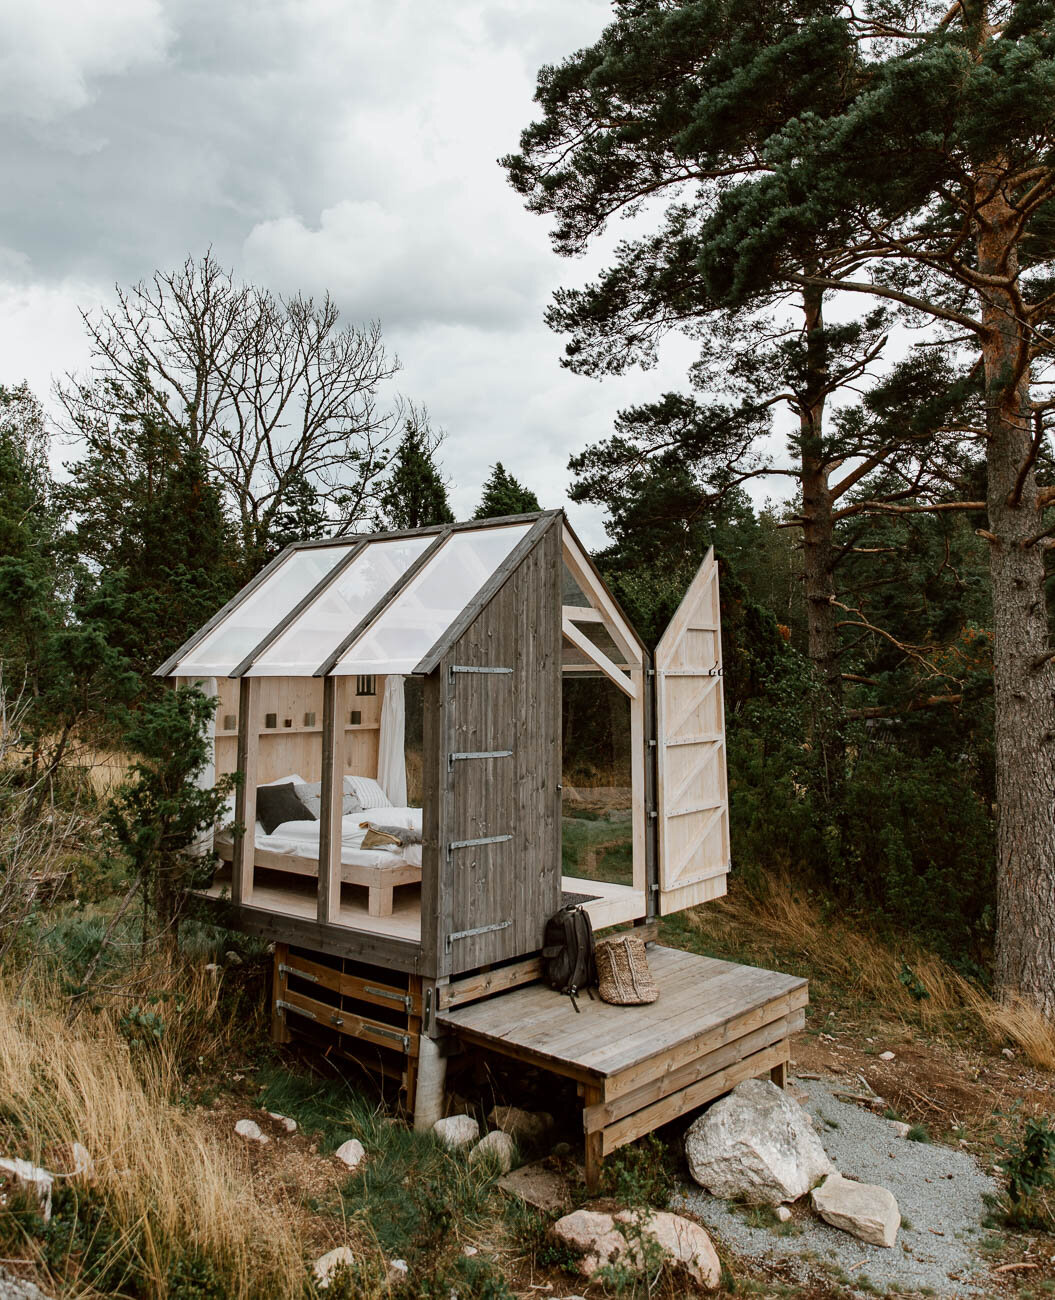 Glass Cabins in the Forest, Sweden - Along Dusty Roads